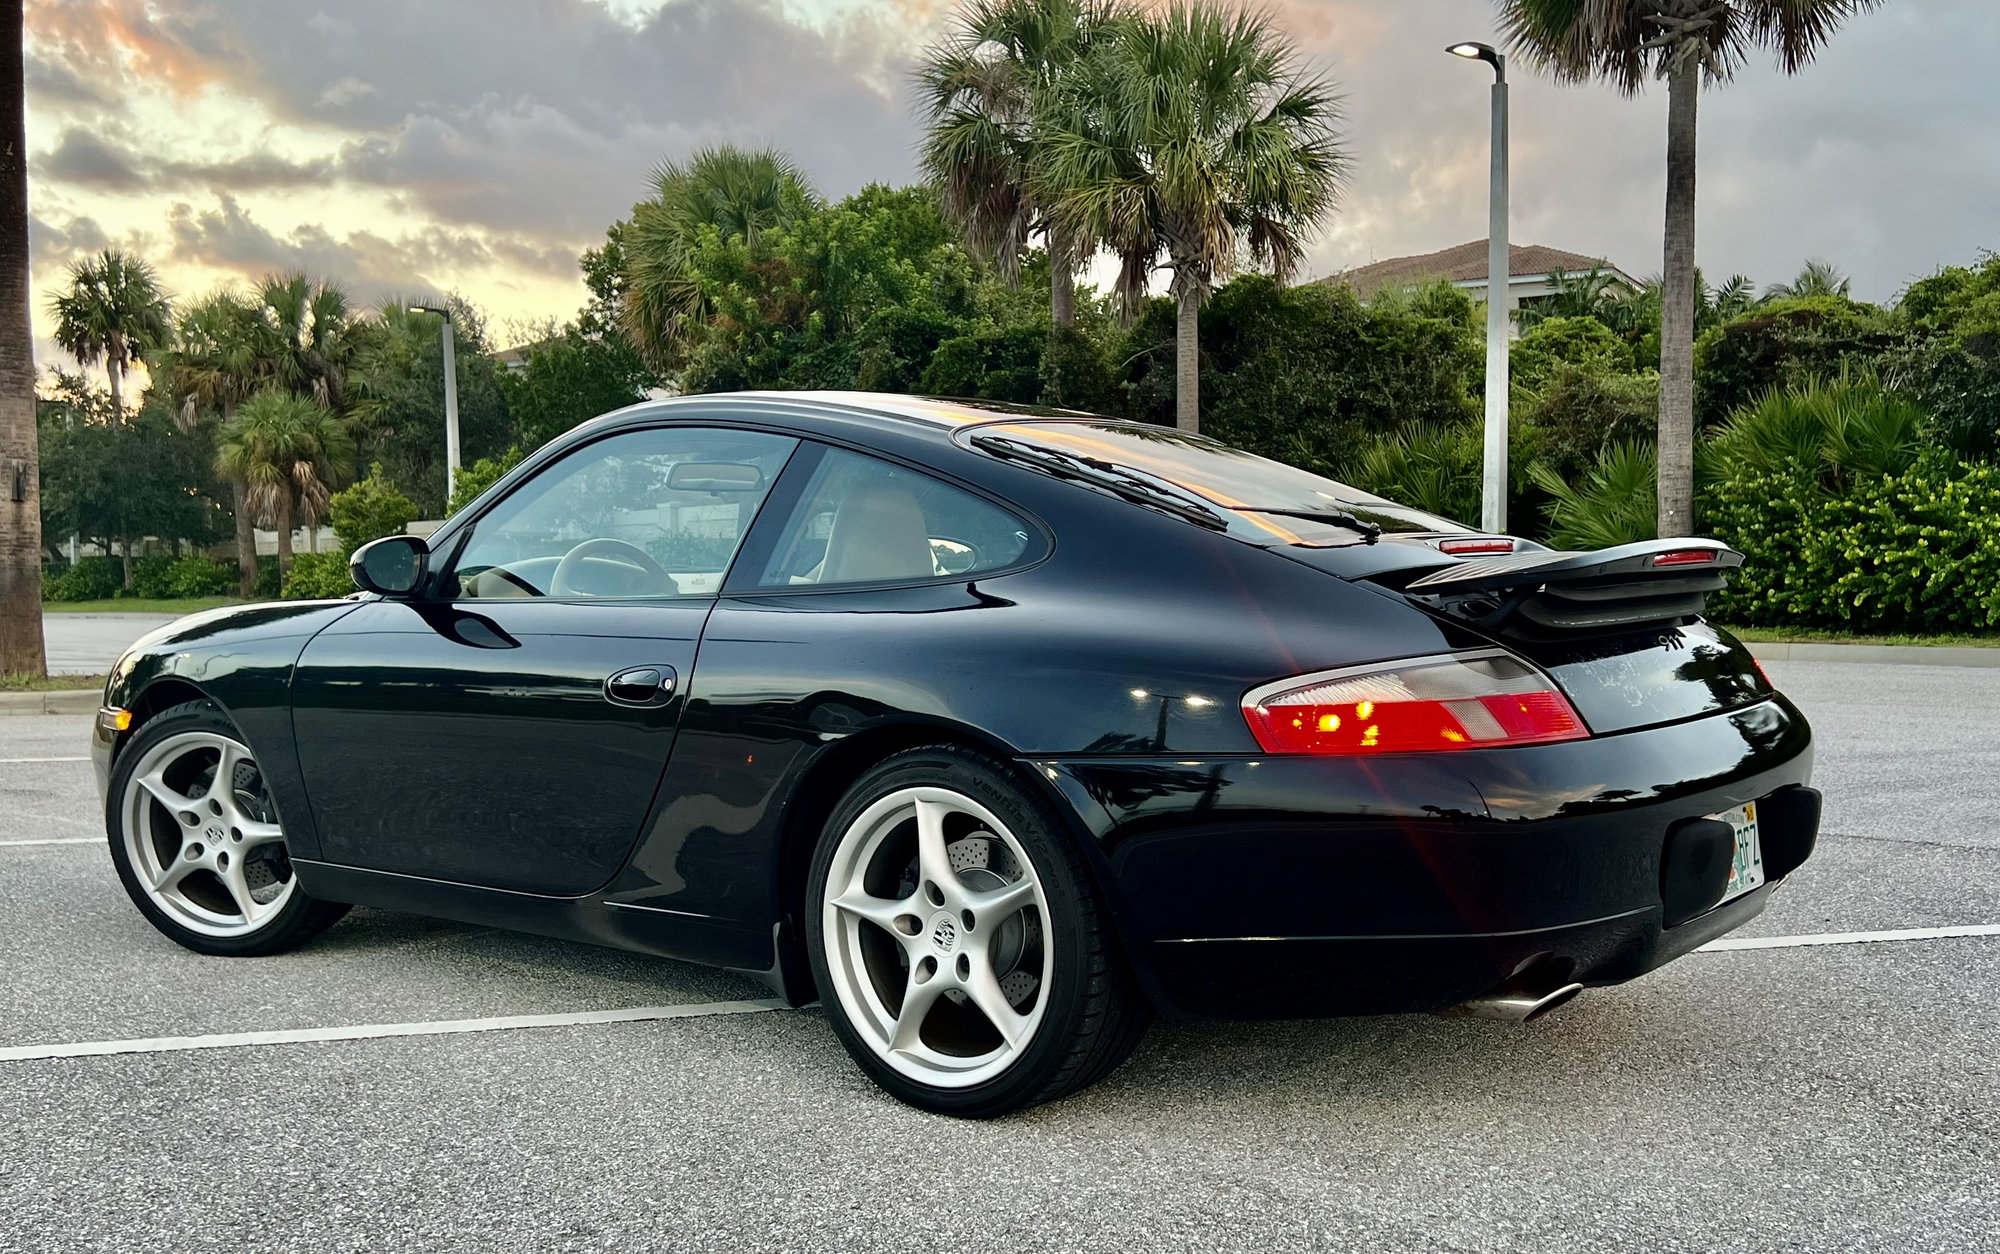 1999 Porsche 911 - Black 99 C2 6Spd 108k mi - IMS done - Clean title - South FL - Used - VIN WP0AA2992XS626517 - 108,500 Miles - 6 cyl - 2WD - Manual - Coupe - Black - North Palm Beach, FL 33408, United States